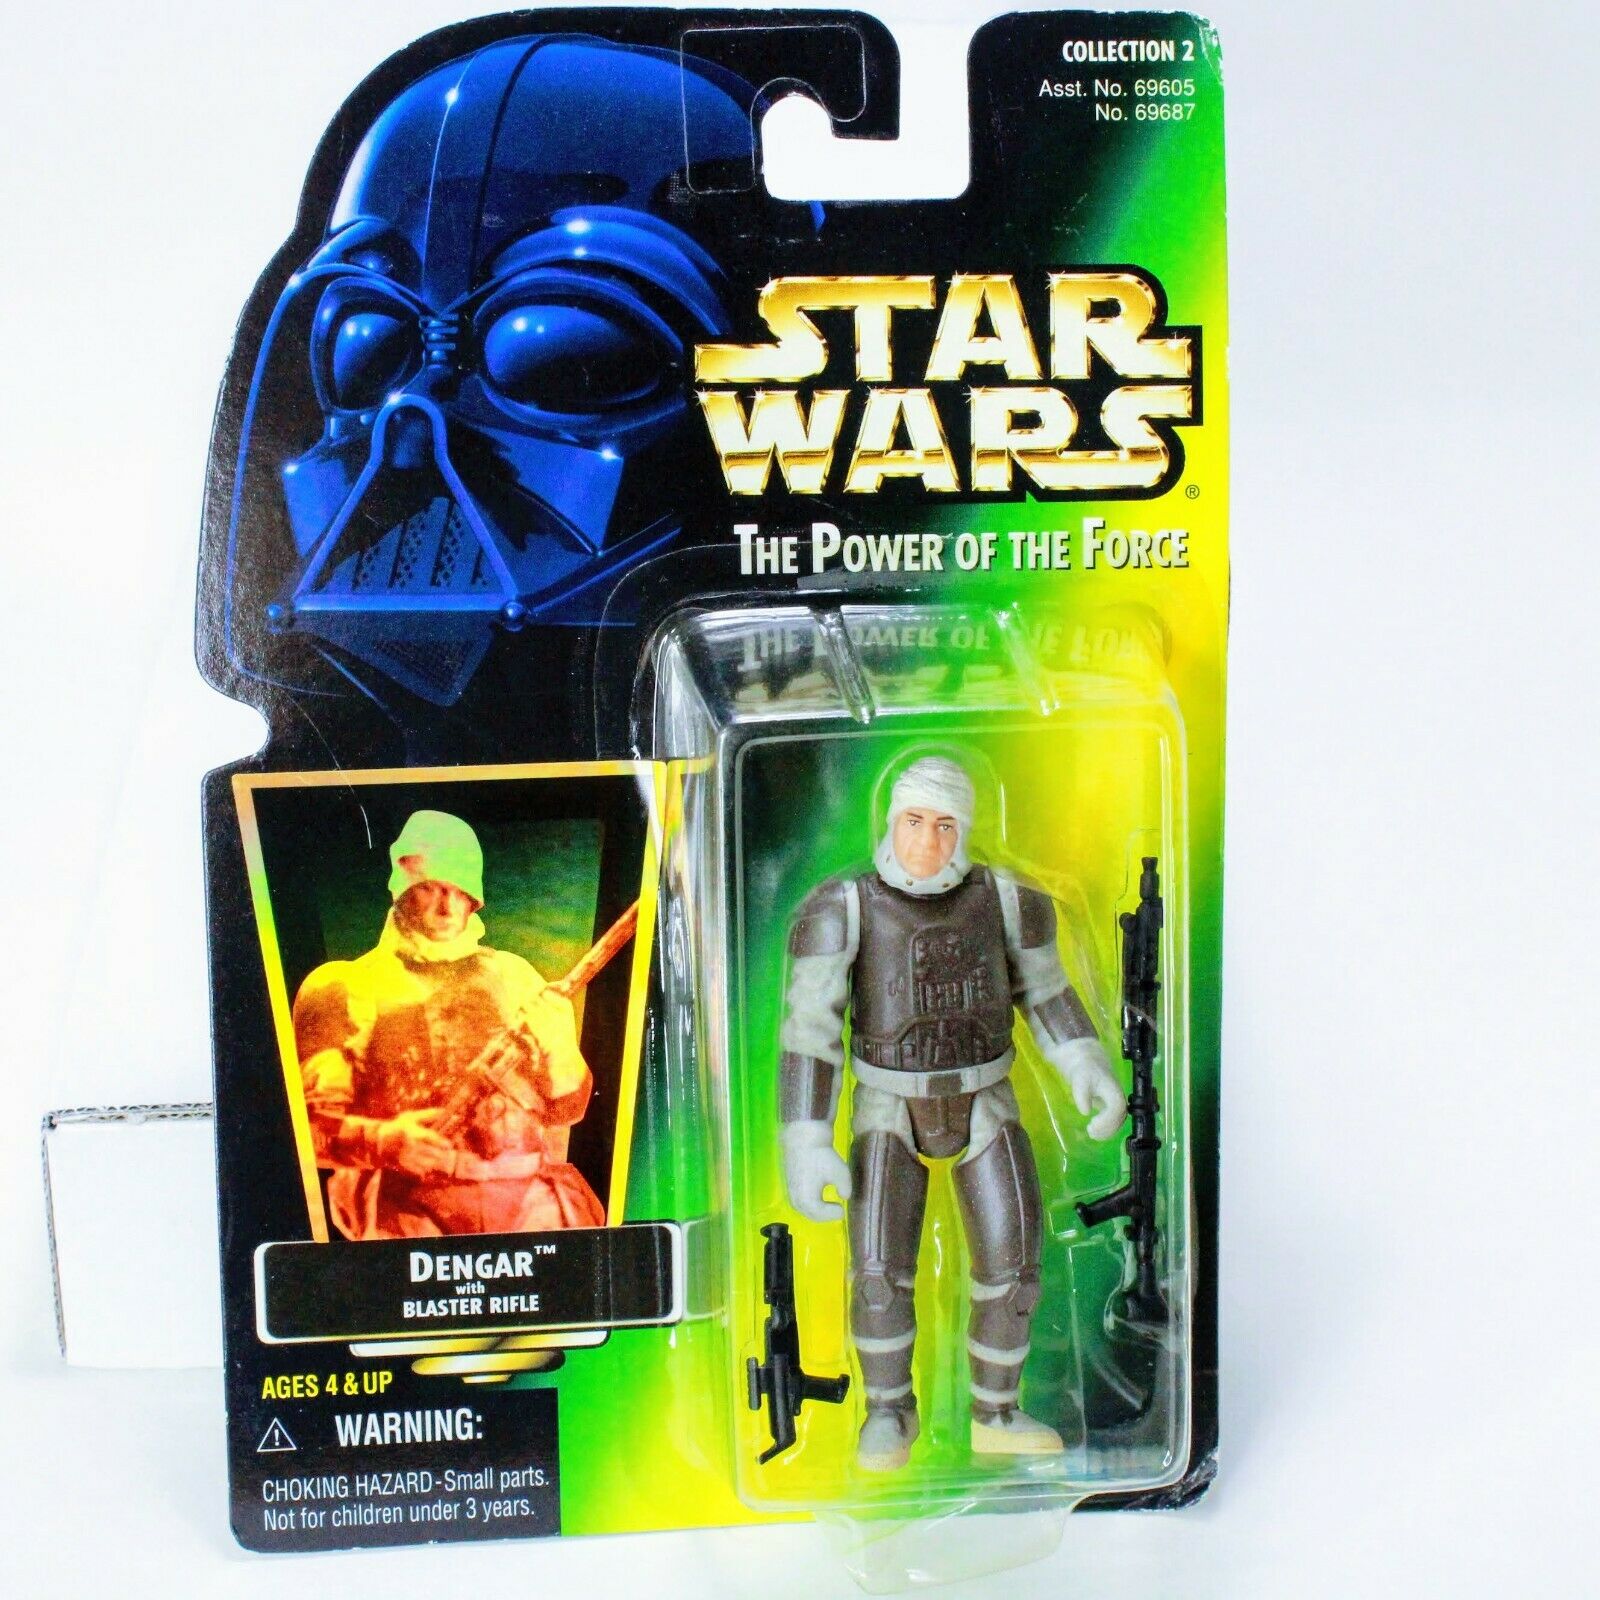 Star Wars The Power of The Force Dengar With Blaster Rifle Action Figure Kenner